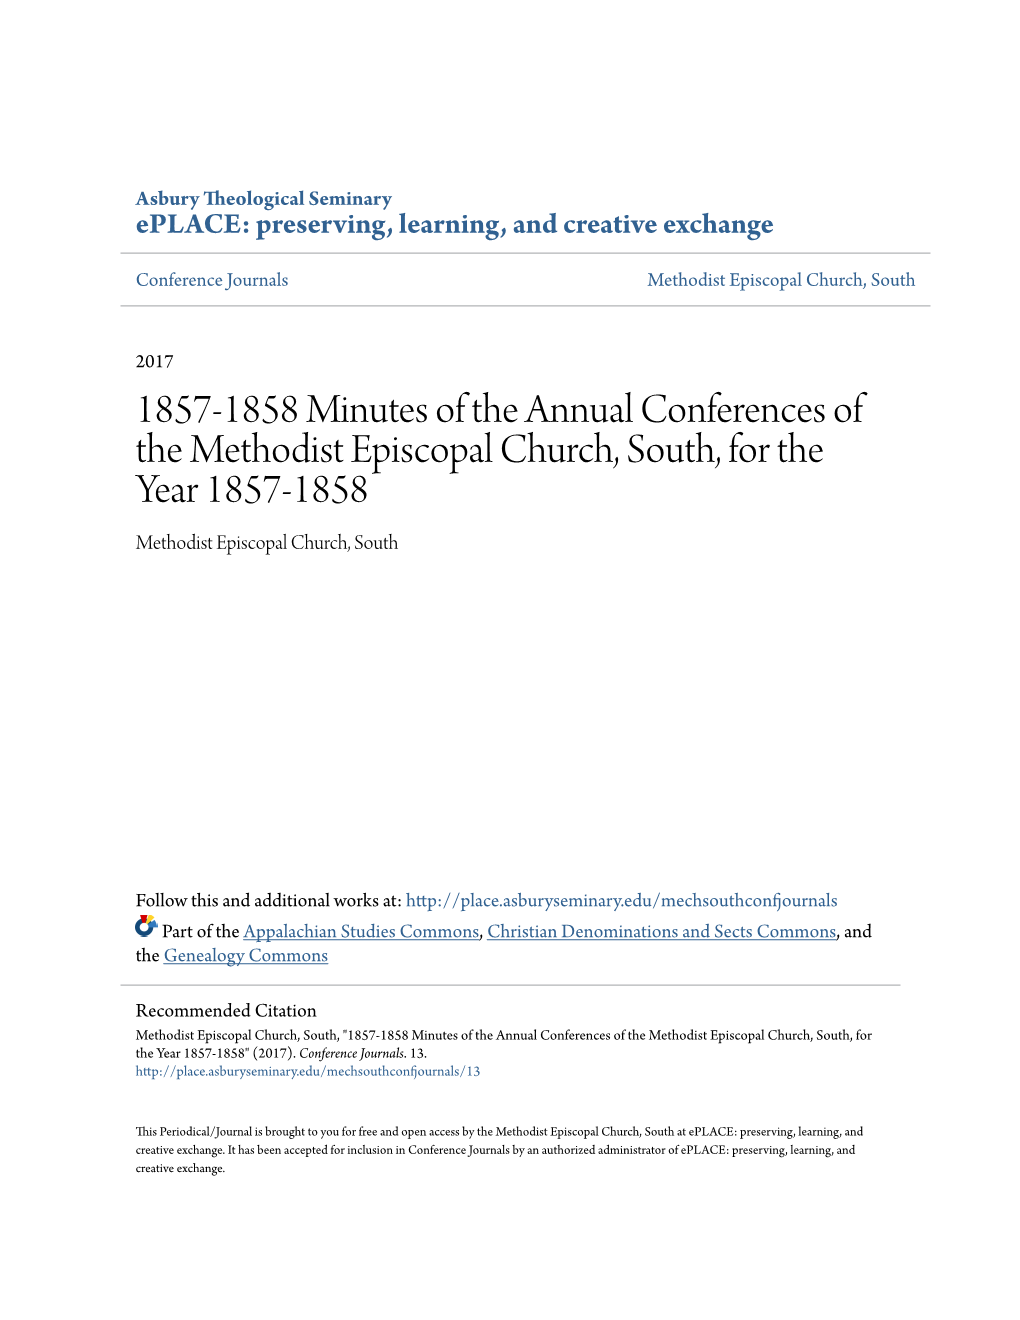 1857-1858 Minutes of the Annual Conferences of the Methodist Episcopal Church, South, for the Year 1857-1858 Methodist Episcopal Church, South